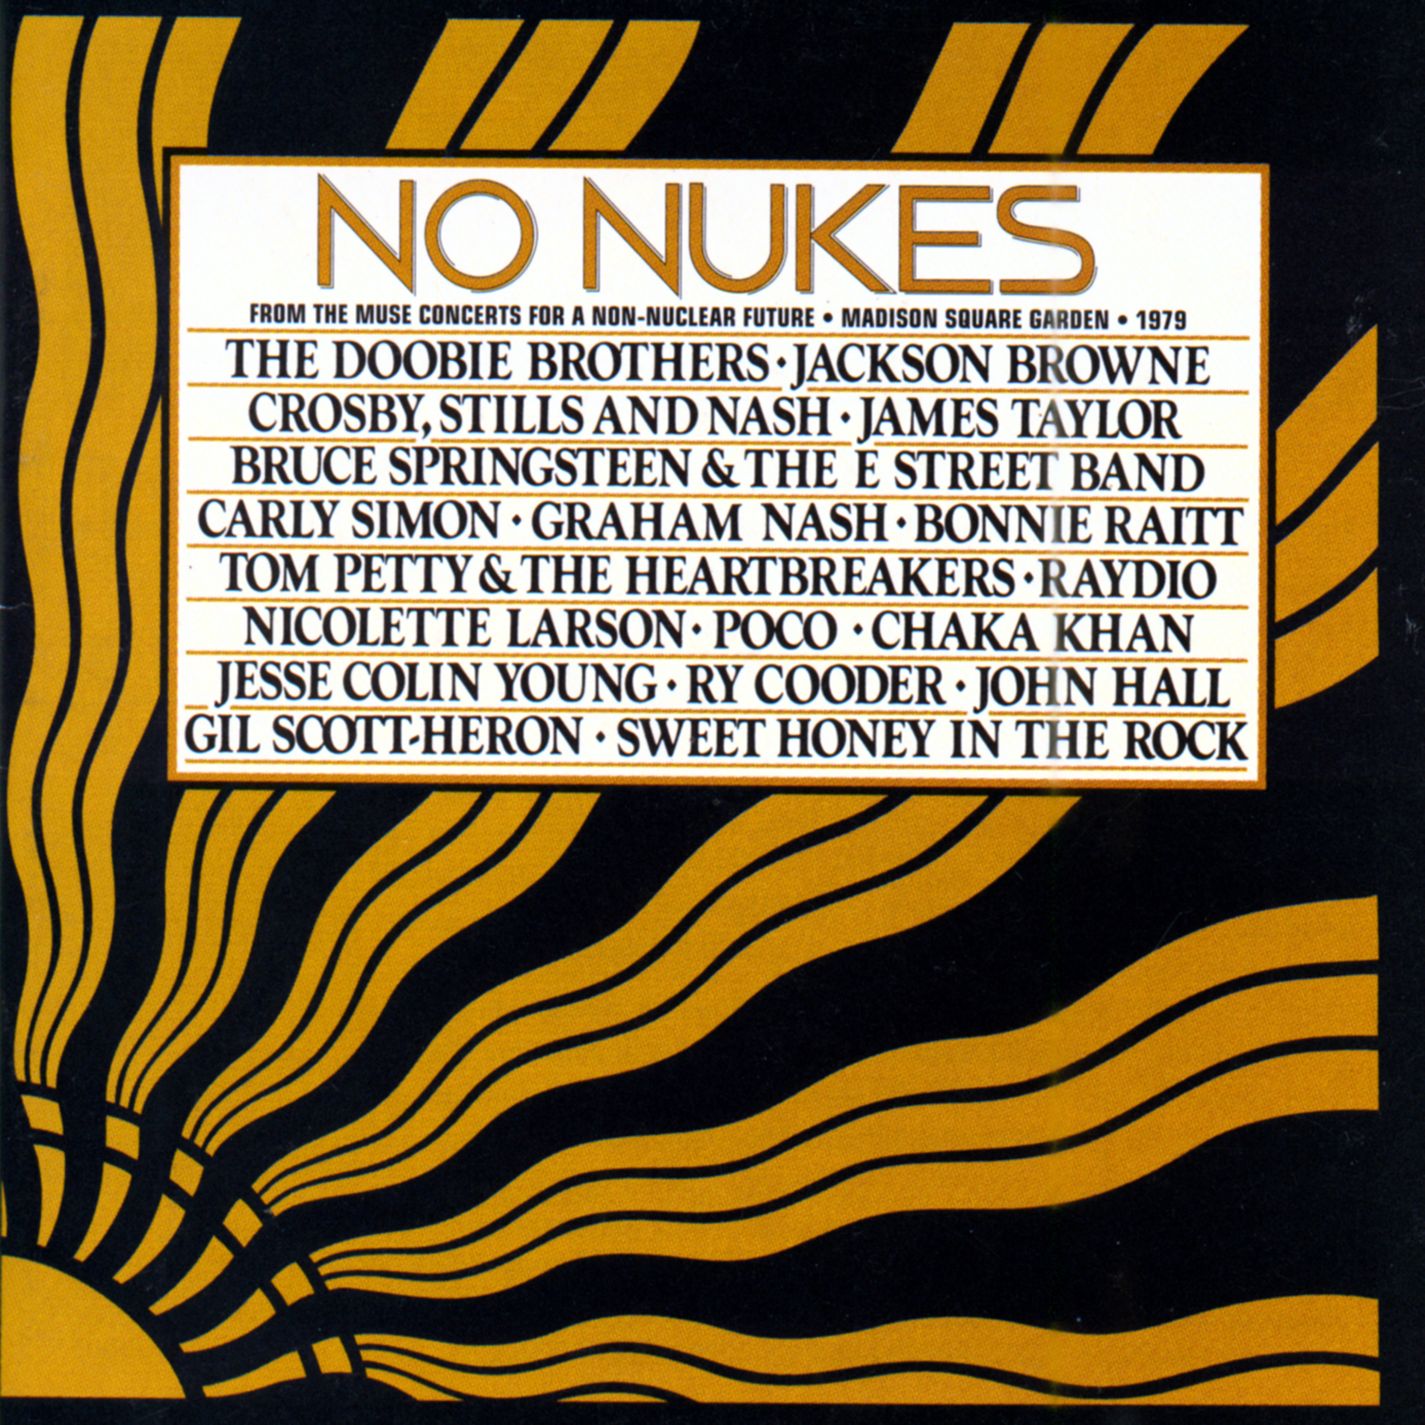 No Nukes - The Muse Concerts for a Non-Nuclear Future